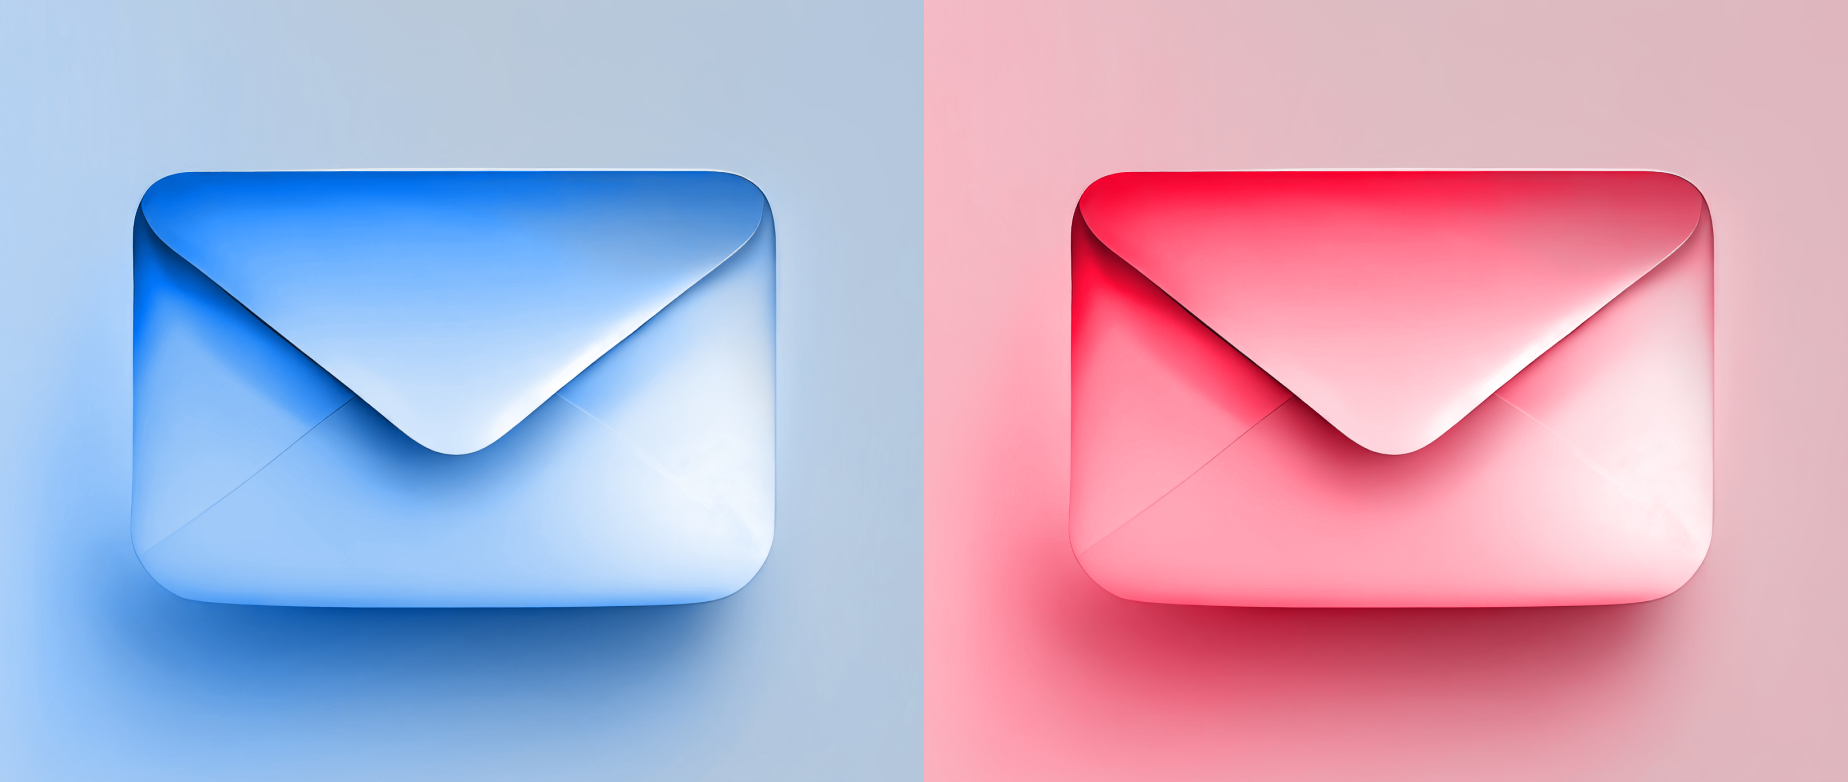 A blue envelope on a blue background next to a red envelope on a red background.